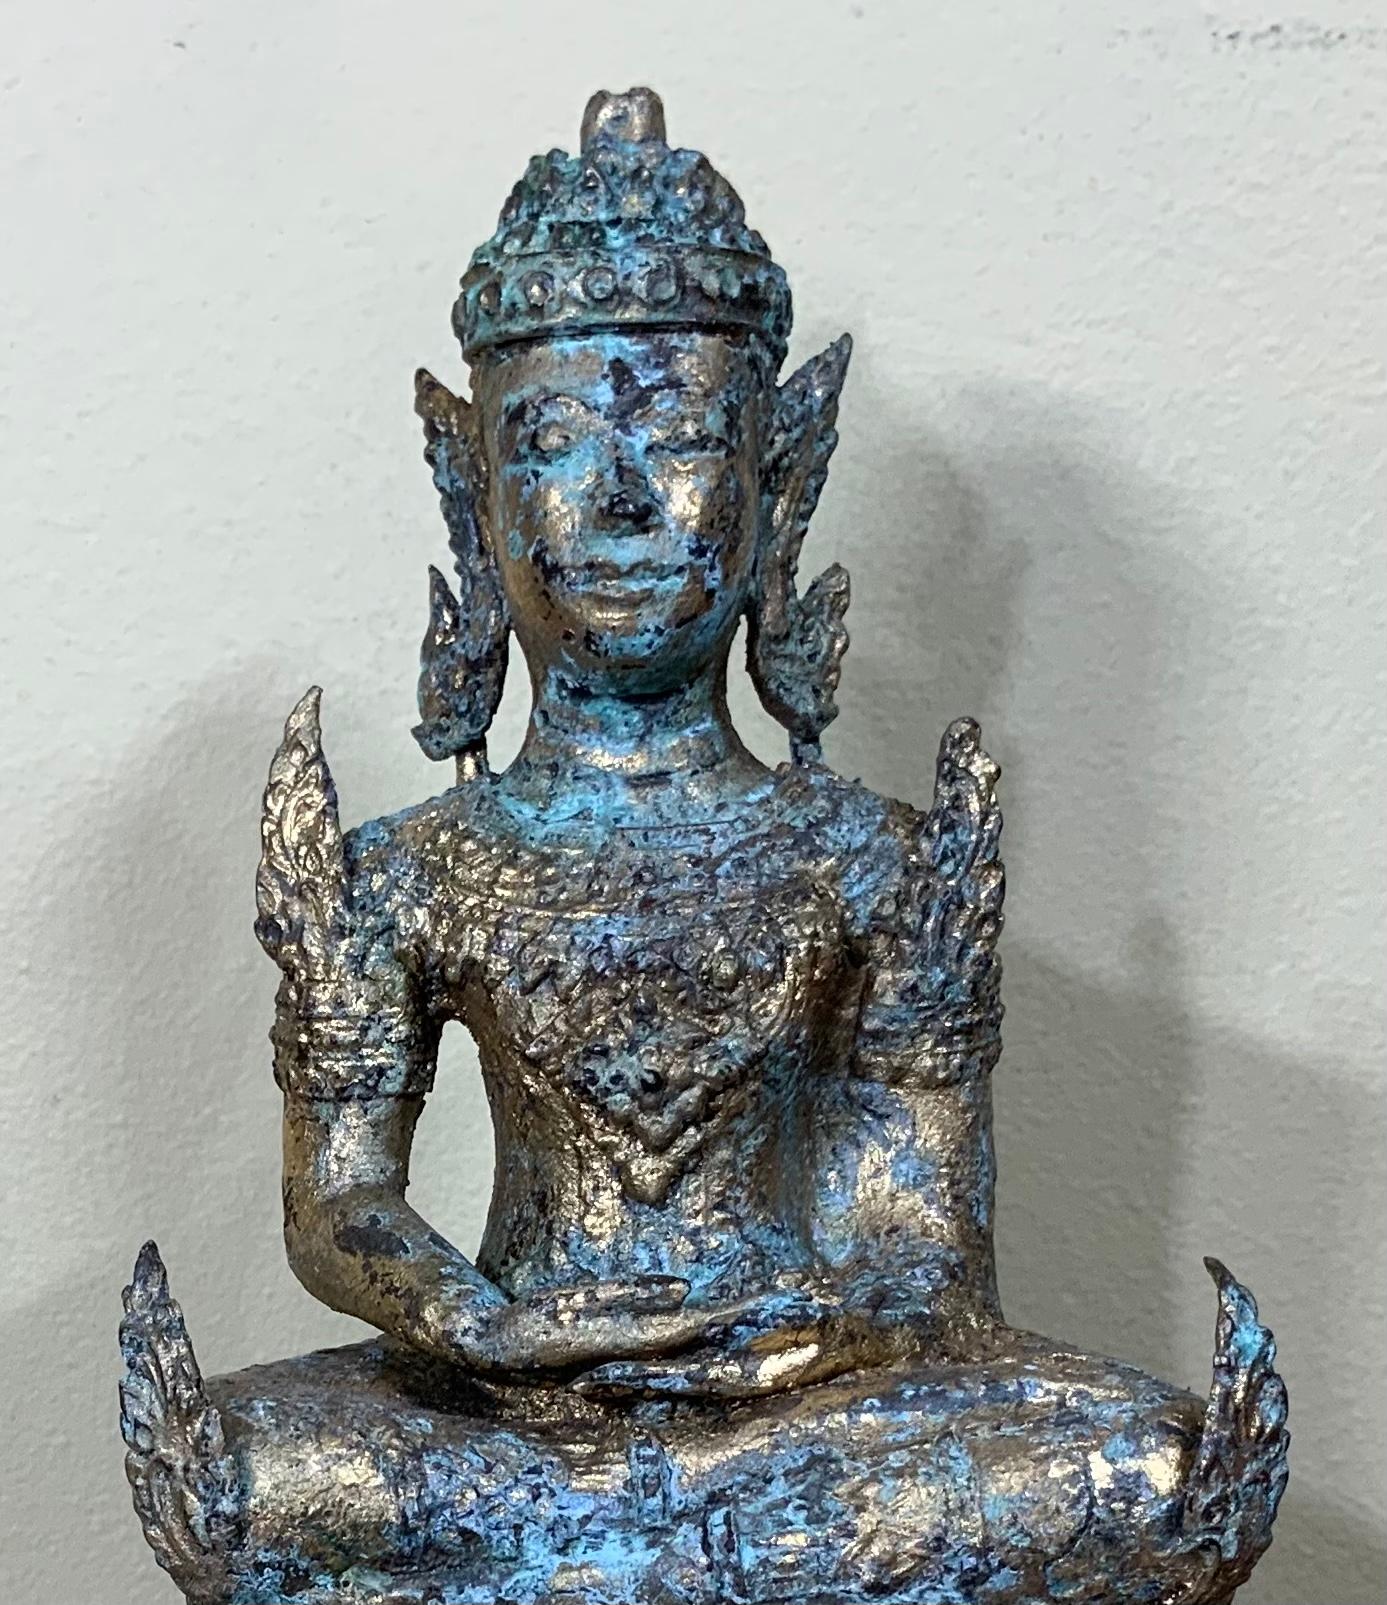 Elegant small sitting Buddha made of bronze circa 1960, gold leaf with Green - turquoise oxidisation color
Vivid details, great decorative item for any room.